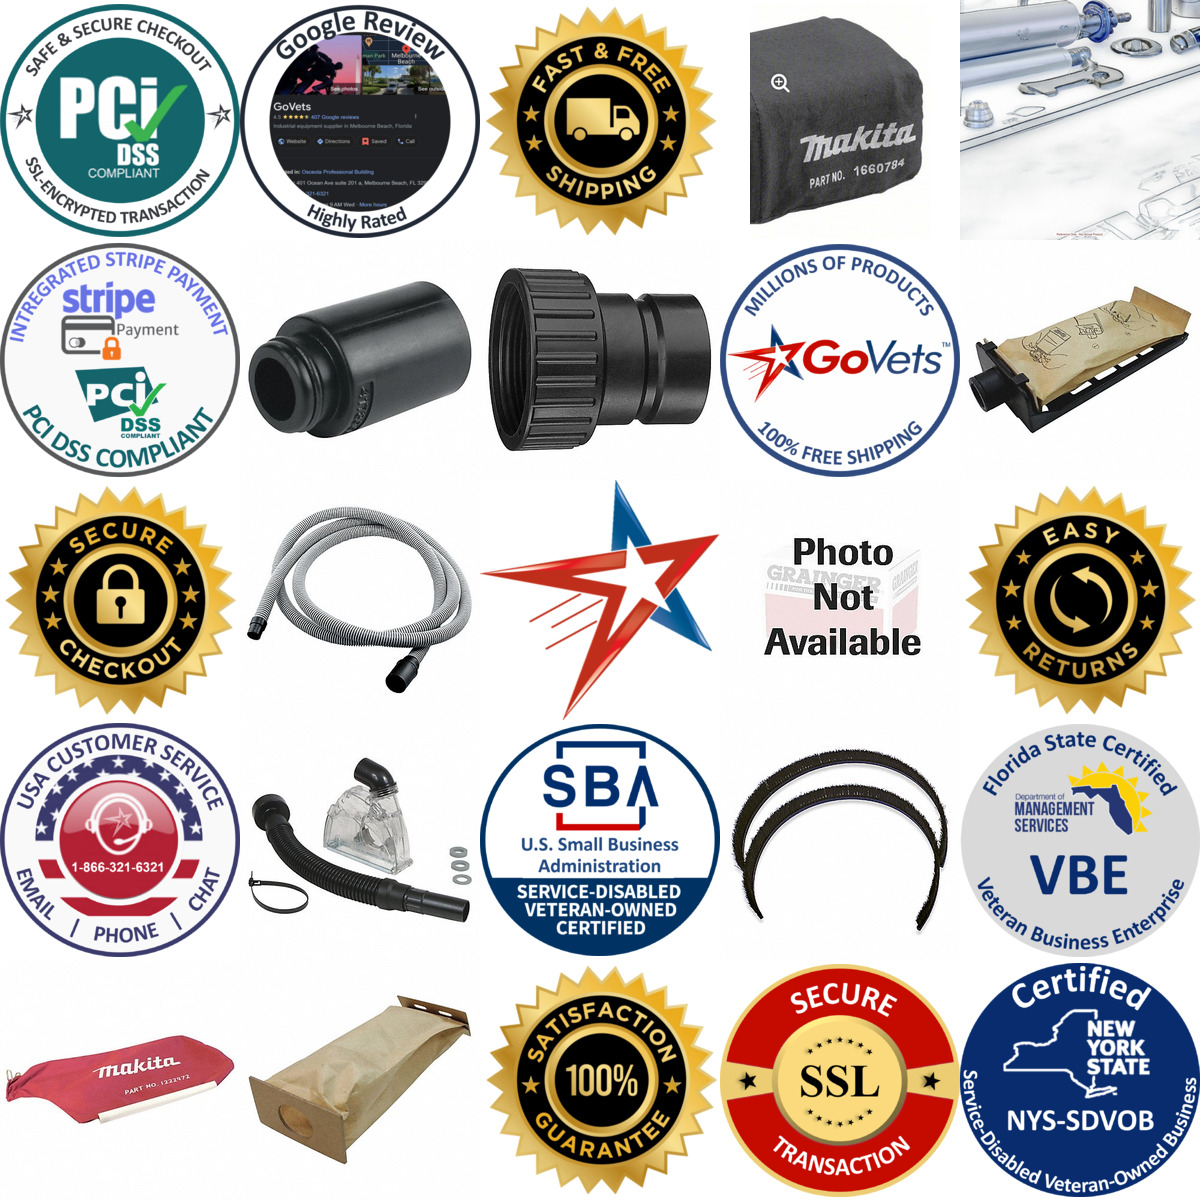 A selection of Power Sanding Dust Collection Accessories products on GoVets